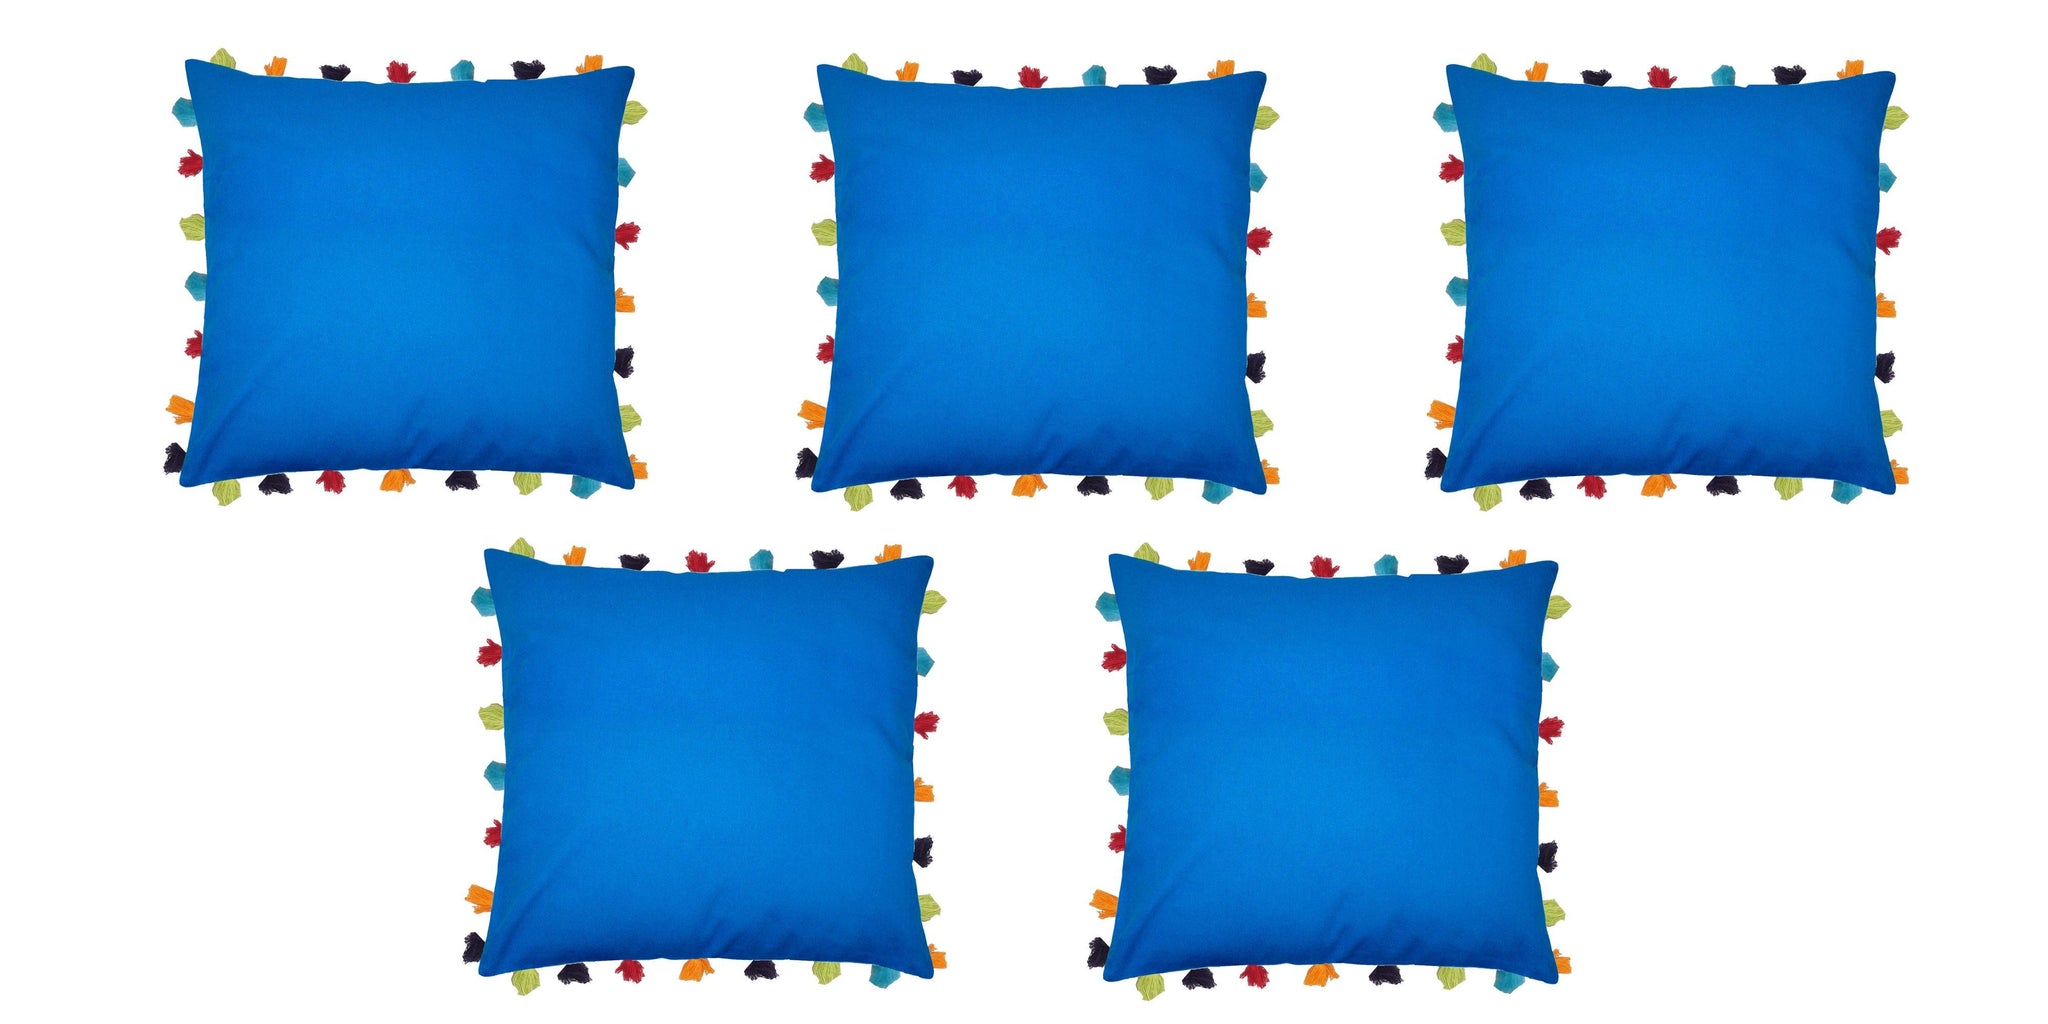 Lushomes Sky Diver Cushion Cover with Colorful tassels (5 pcs, 20 x 20”) - Lushomes